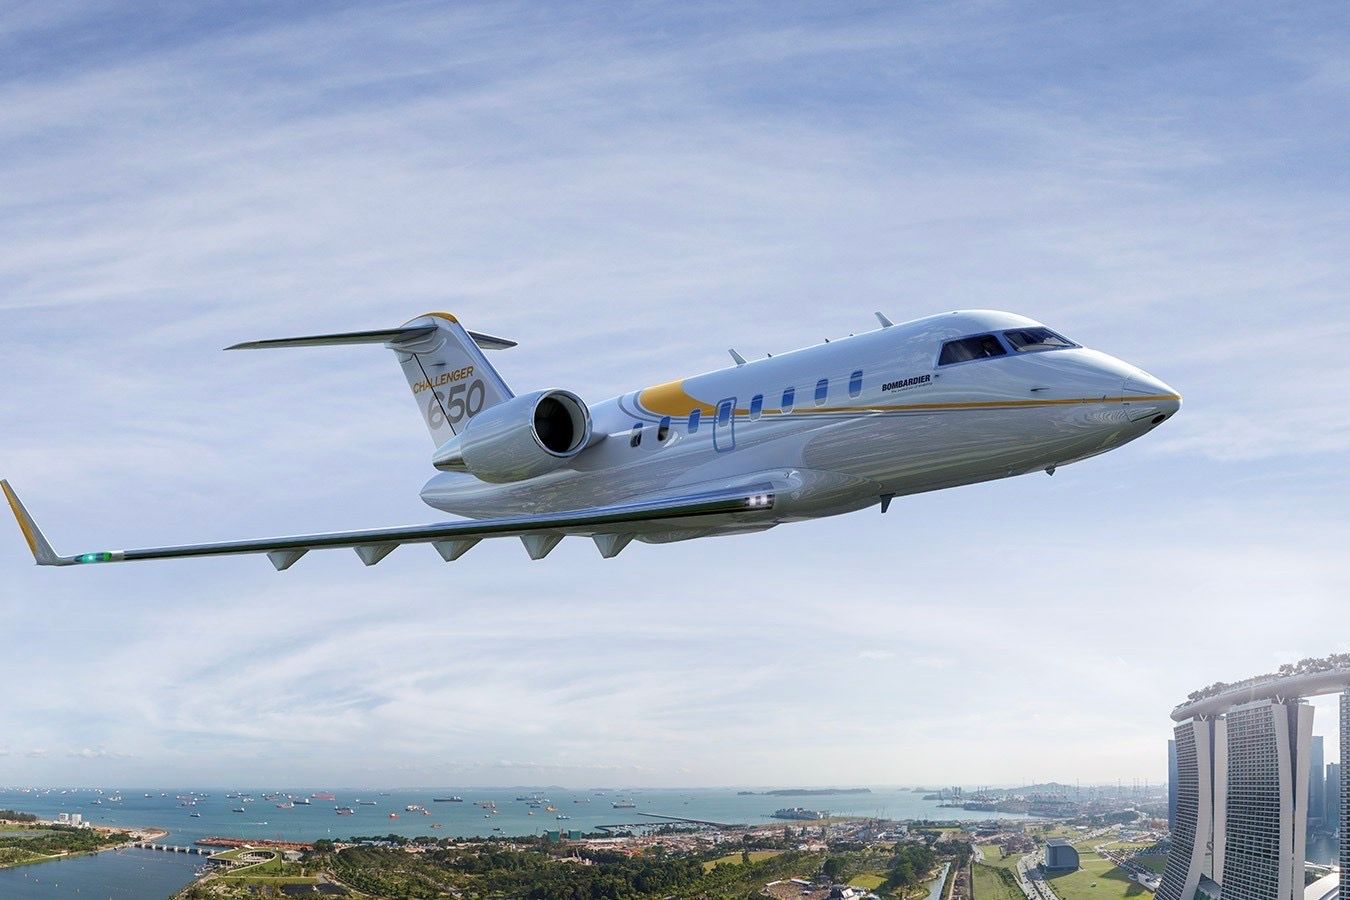 Challenger 650 flying over Singapore